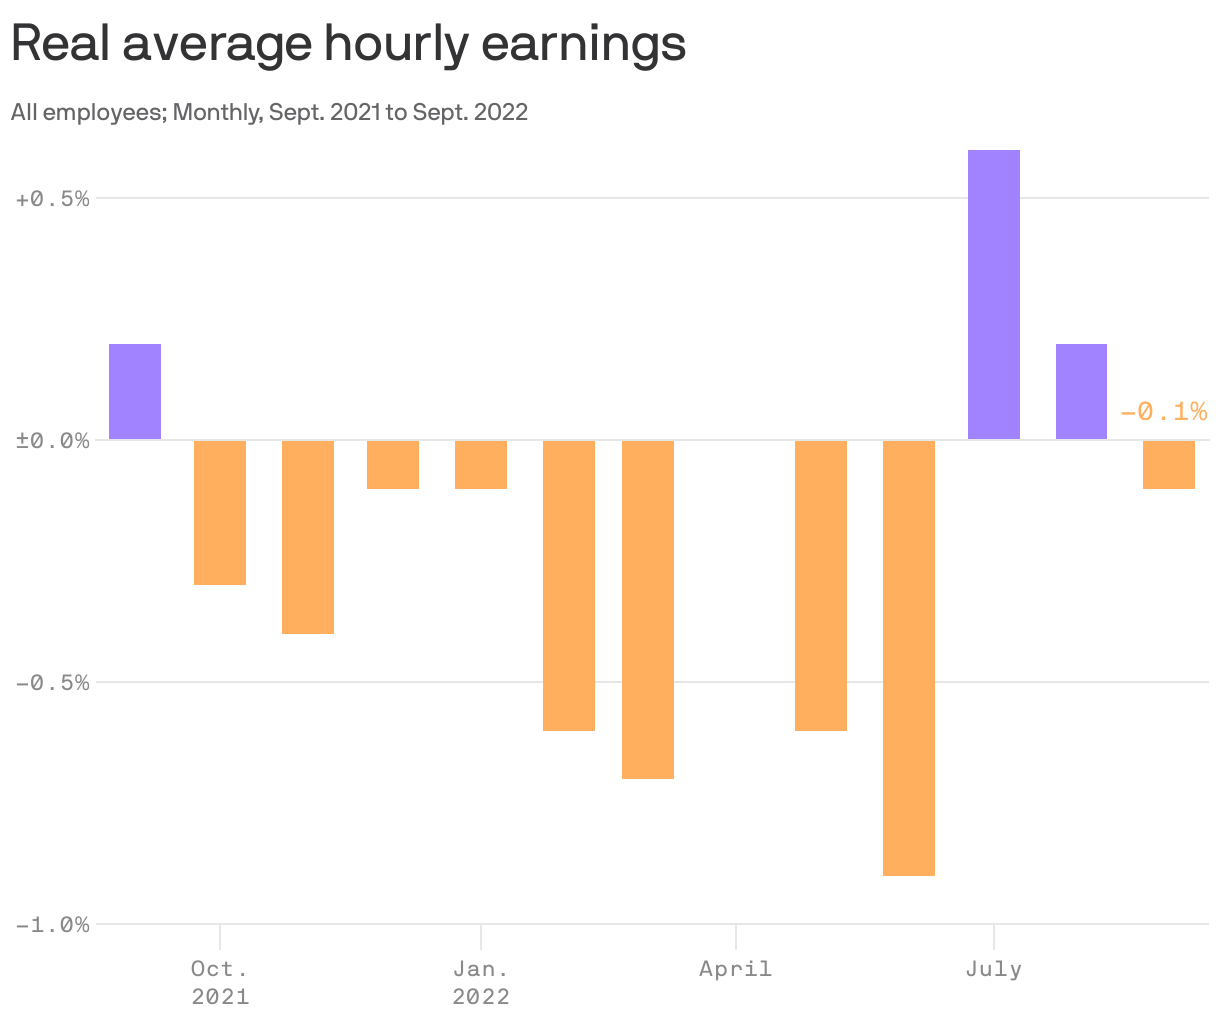 Real average hourly earnings